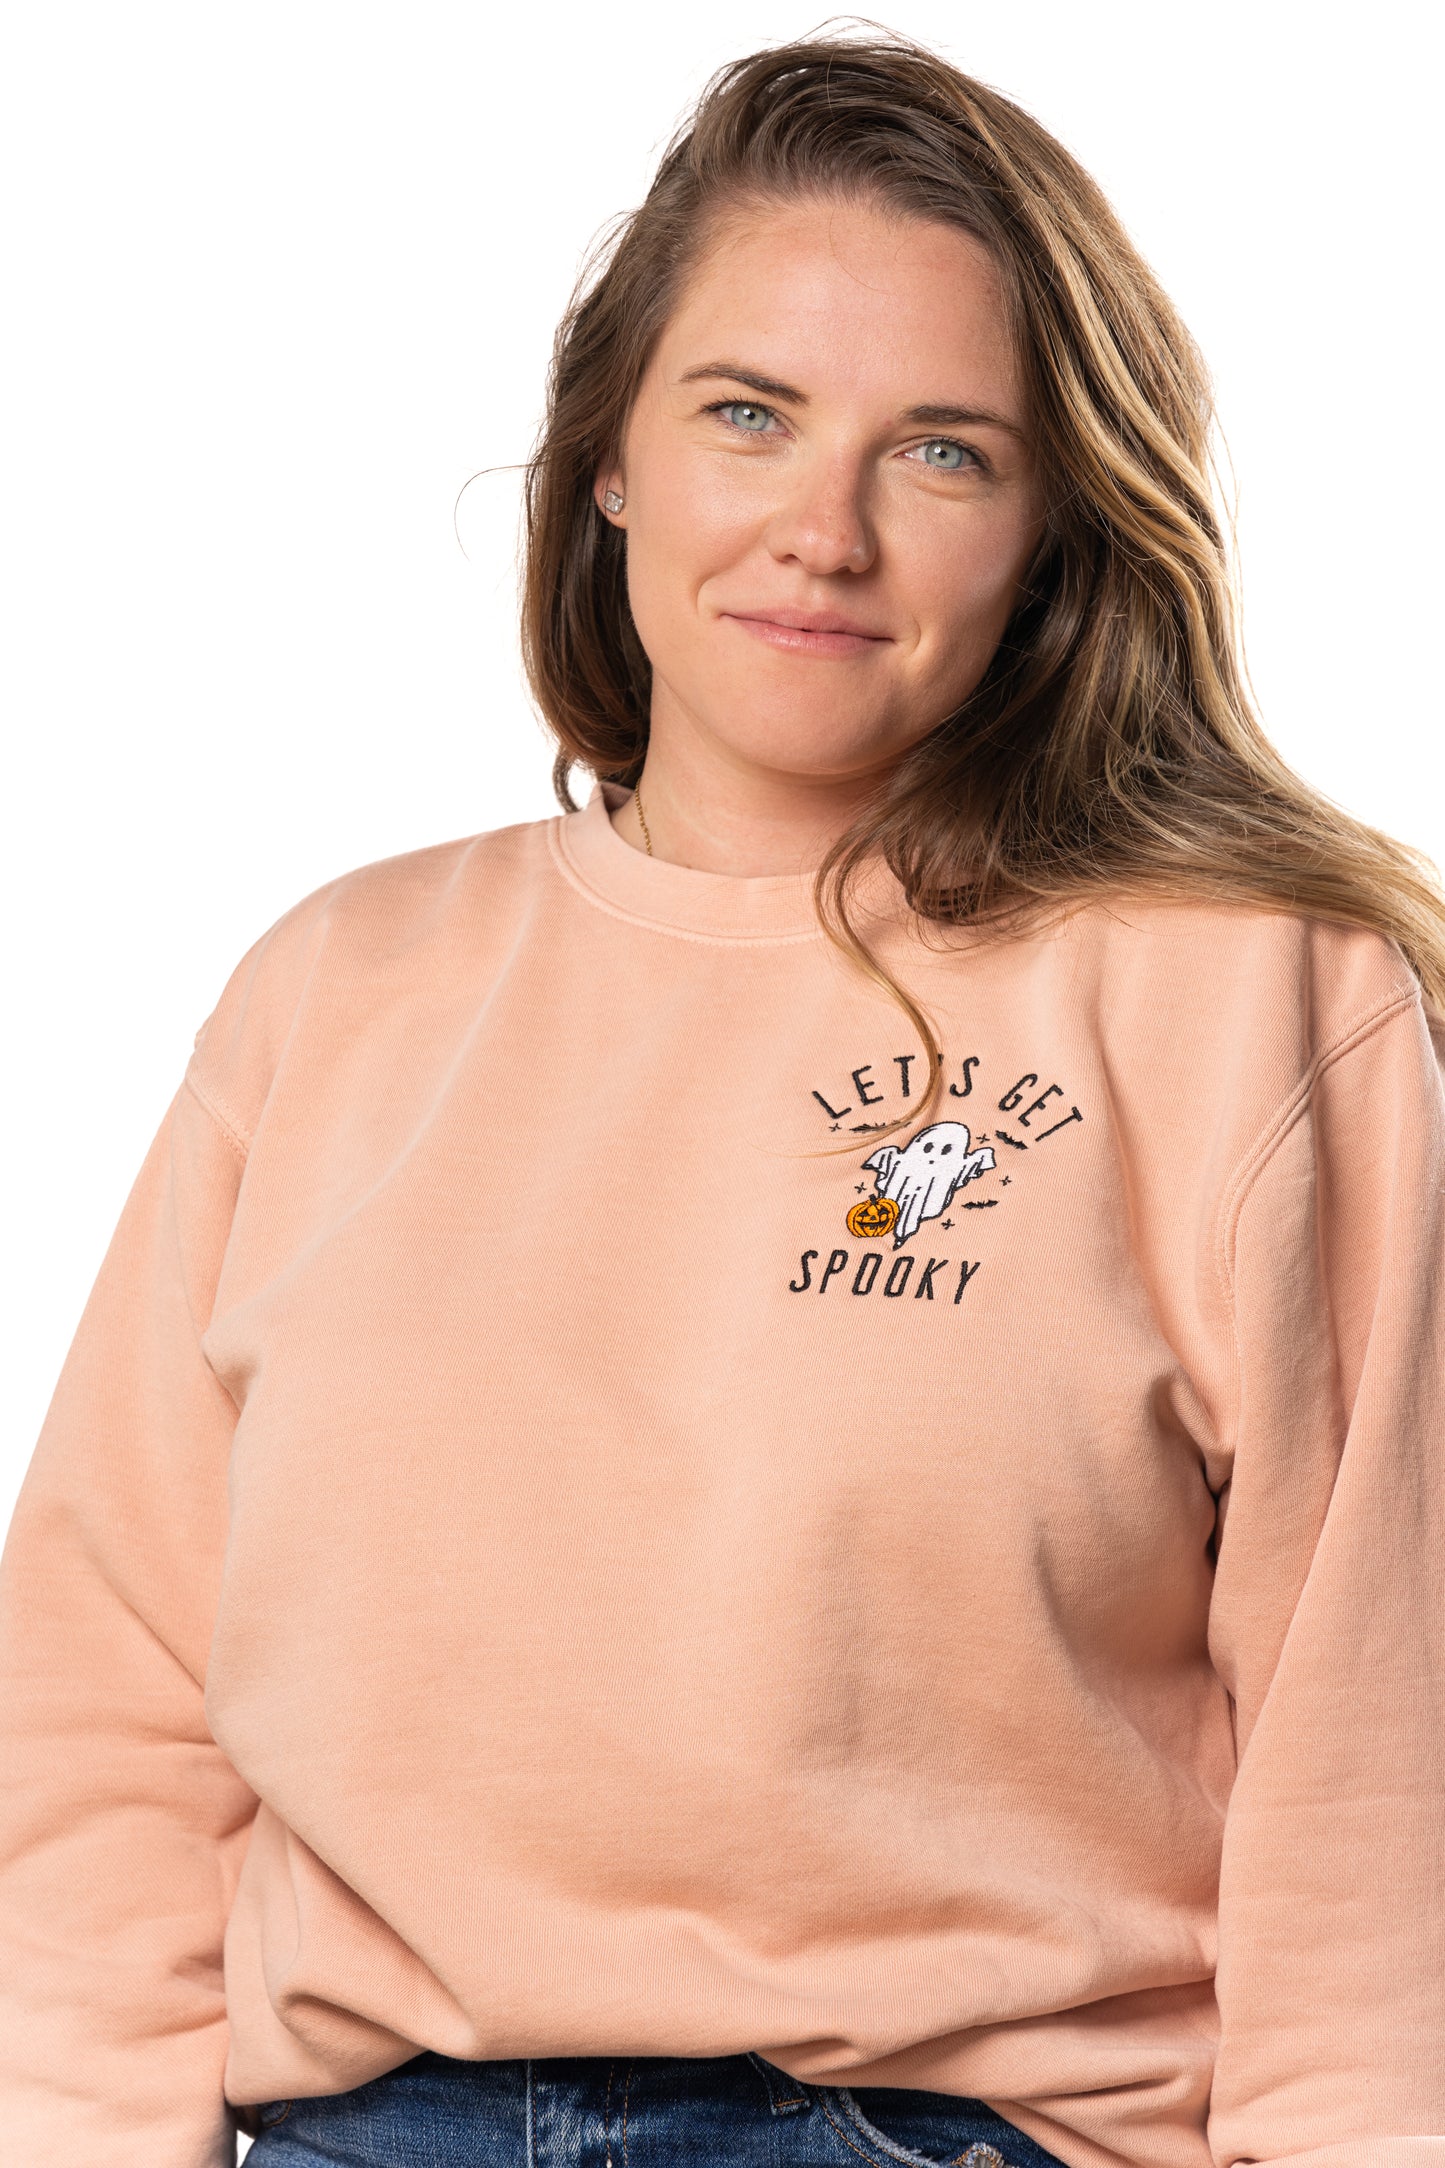 Let's Get Spooky - Embroidered Sweatshirt (Dusty Peach)